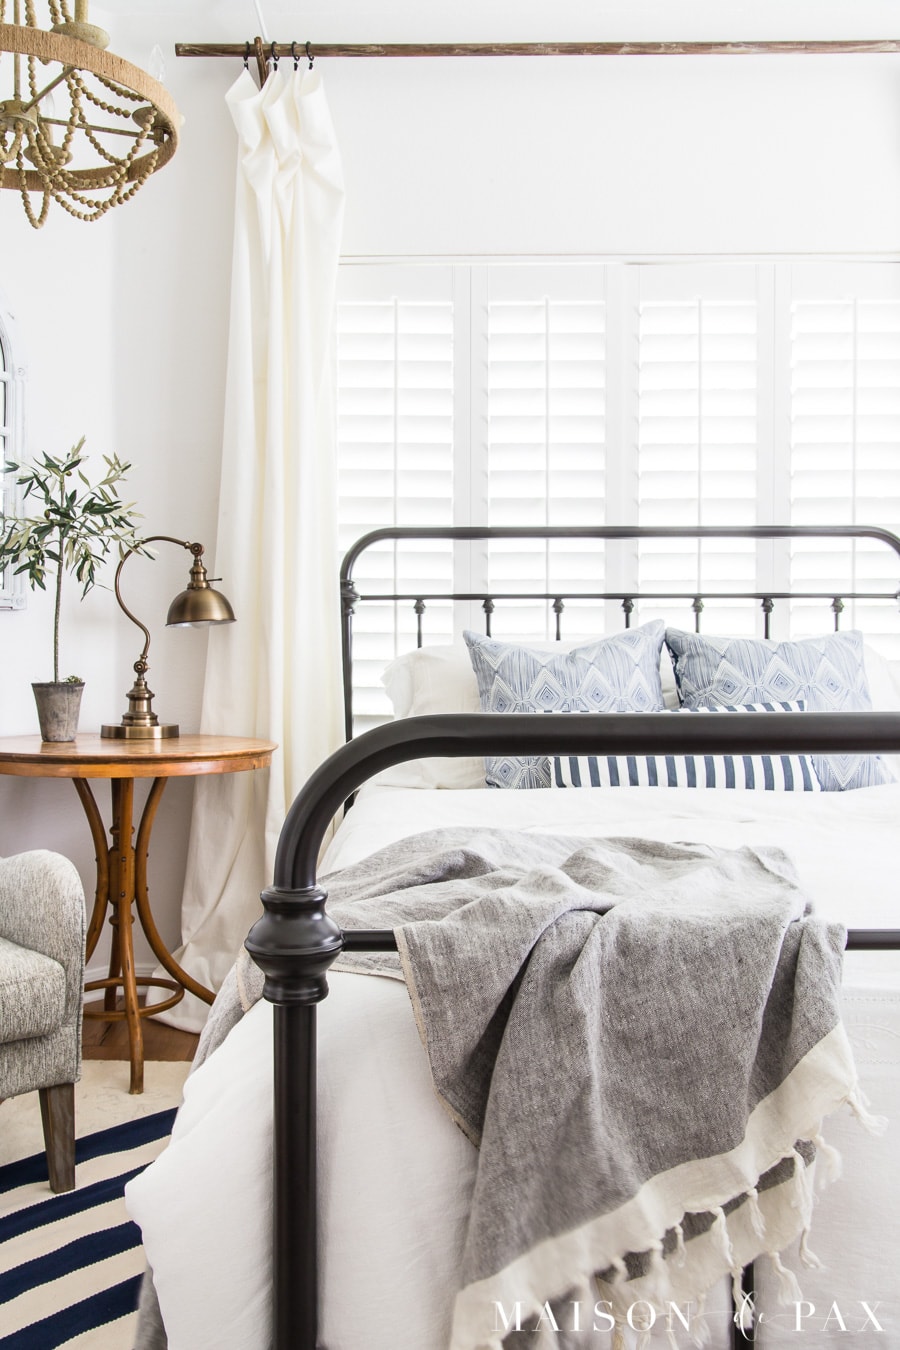 Efficient decorating ideas: fringed throw blankets. Find out which accessories are most versatile in your home! #efficiency #budgetfriendly #budgetdecor #decoratingideas #accessories #homedecor